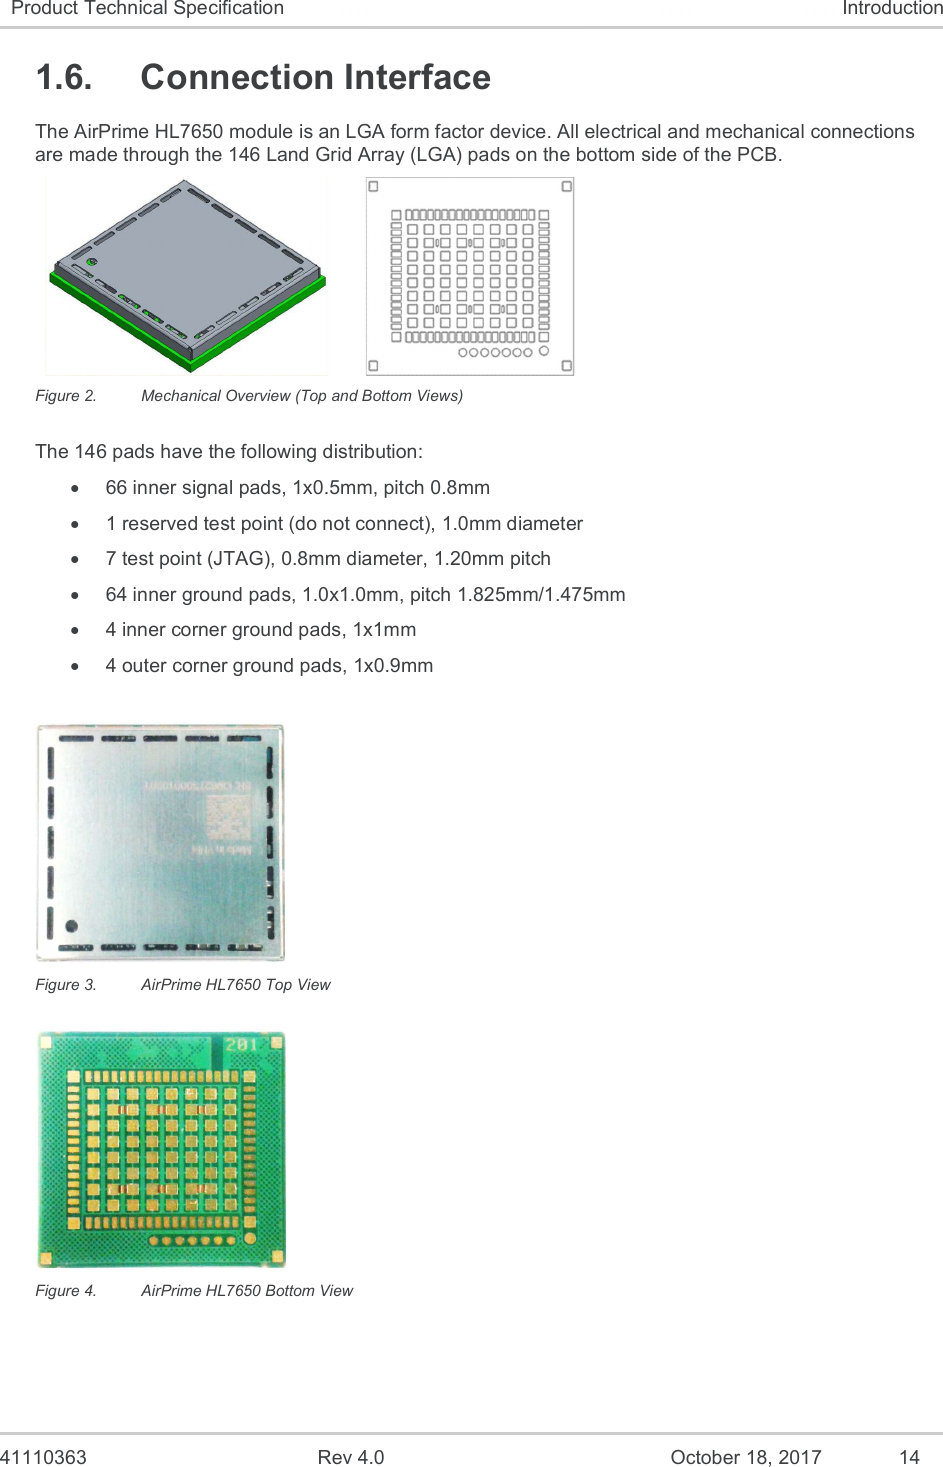   41110363  Rev 4.0  October 18, 2017  14 Product Technical Specification  Introduction 1.6.  Connection Interface The AirPrime HL7650 module is an LGA form factor device. All electrical and mechanical connections are made through the 146 Land Grid Array (LGA) pads on the bottom side of the PCB.       Figure 2.  Mechanical Overview (Top and Bottom Views) The 146 pads have the following distribution:   66 inner signal pads, 1x0.5mm, pitch 0.8mm   1 reserved test point (do not connect), 1.0mm diameter   7 test point (JTAG), 0.8mm diameter, 1.20mm pitch   64 inner ground pads, 1.0x1.0mm, pitch 1.825mm/1.475mm   4 inner corner ground pads, 1x1mm   4 outer corner ground pads, 1x0.9mm   Figure 3.  AirPrime HL7650 Top View  Figure 4.  AirPrime HL7650 Bottom View 